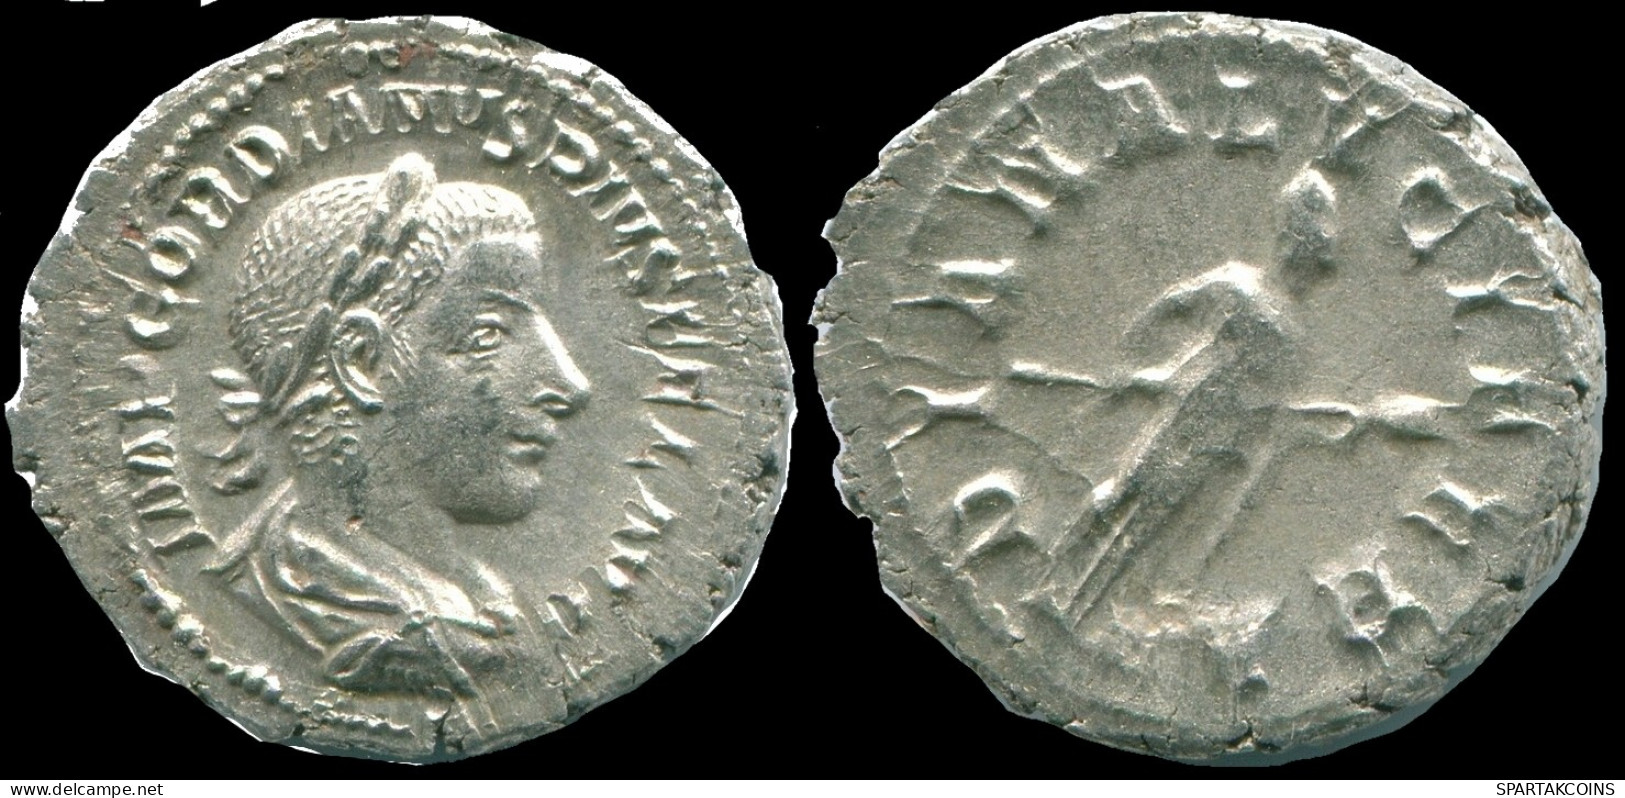 GORDIAN III AR DENARIUS ROME (7TH ISSUE. 1ST OFFICINA) DIANA #ANC13046.84.D.A - The Military Crisis (235 AD Tot 284 AD)